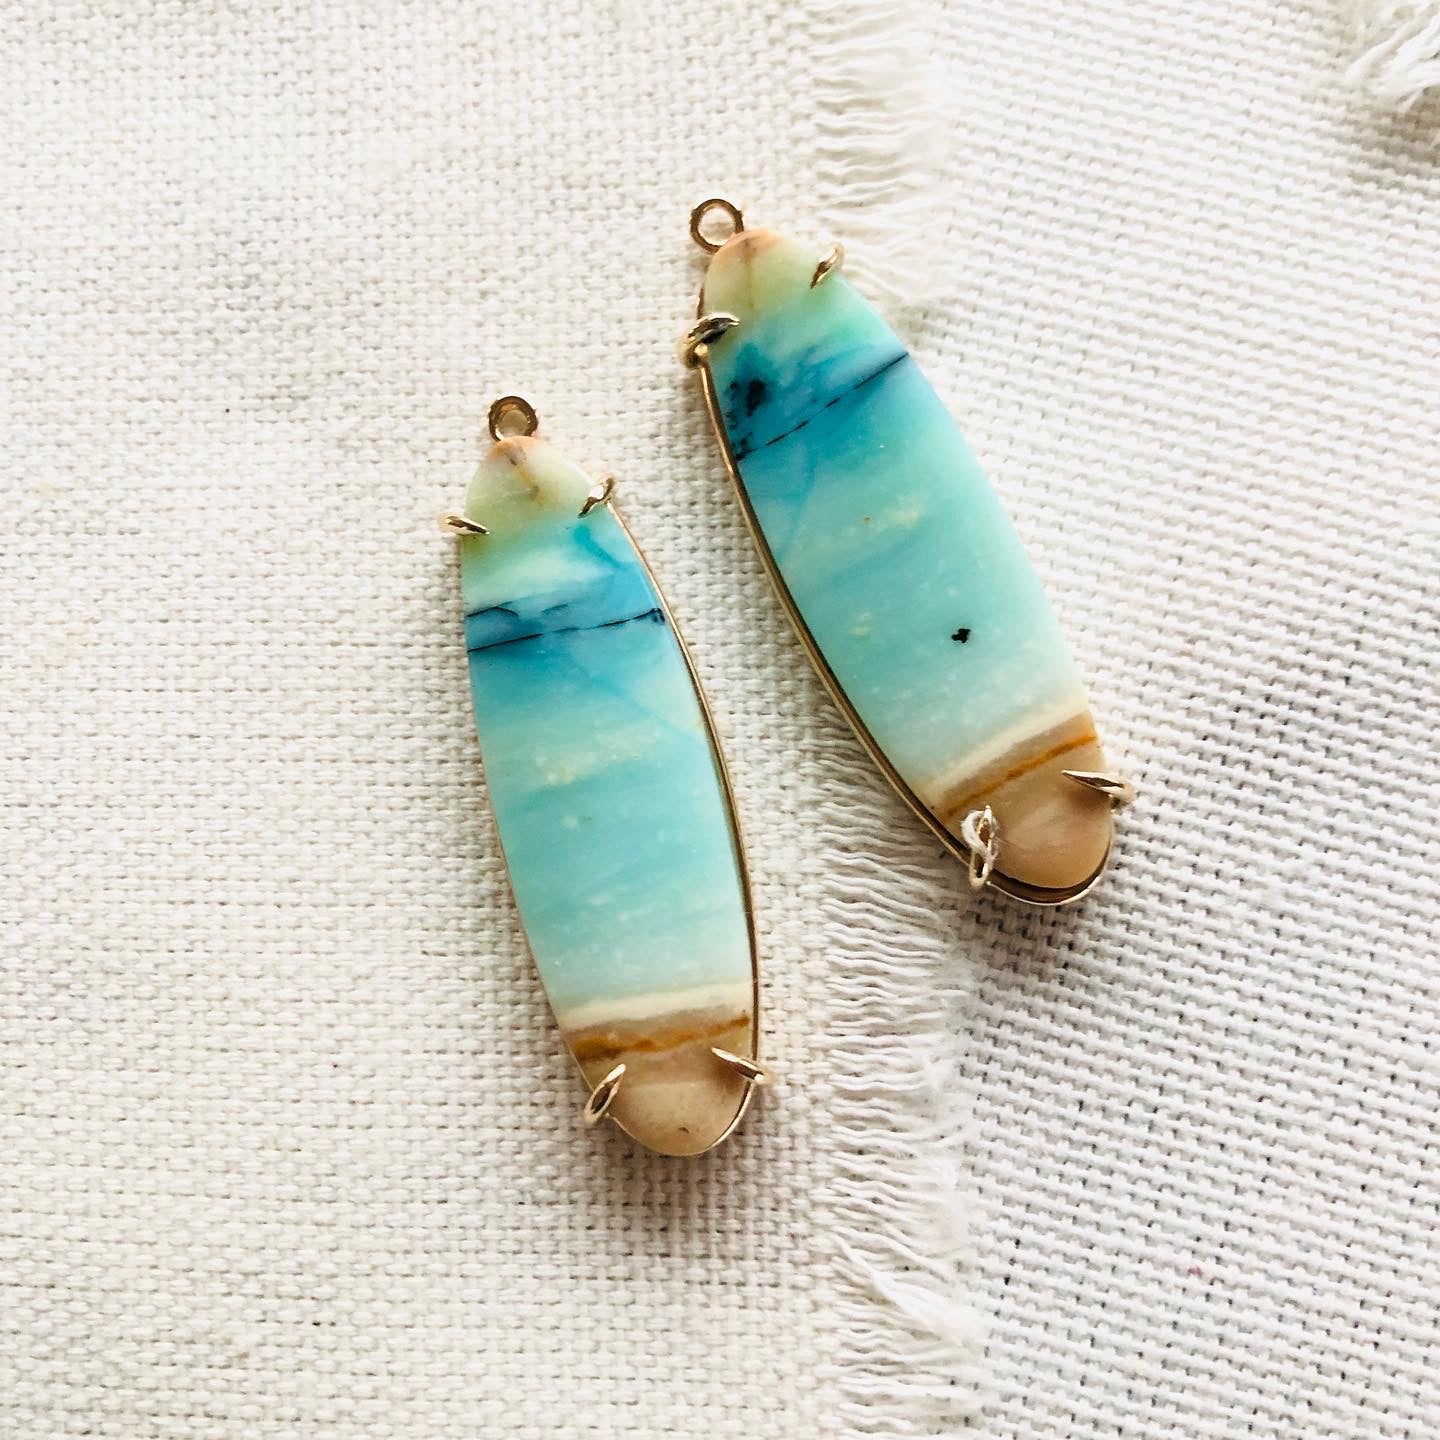 These blue opalized fossilized Indonesian wood earrings remind me so much of the beaches in Hawaii.  Blue opal jewelry is rare and hard to find.